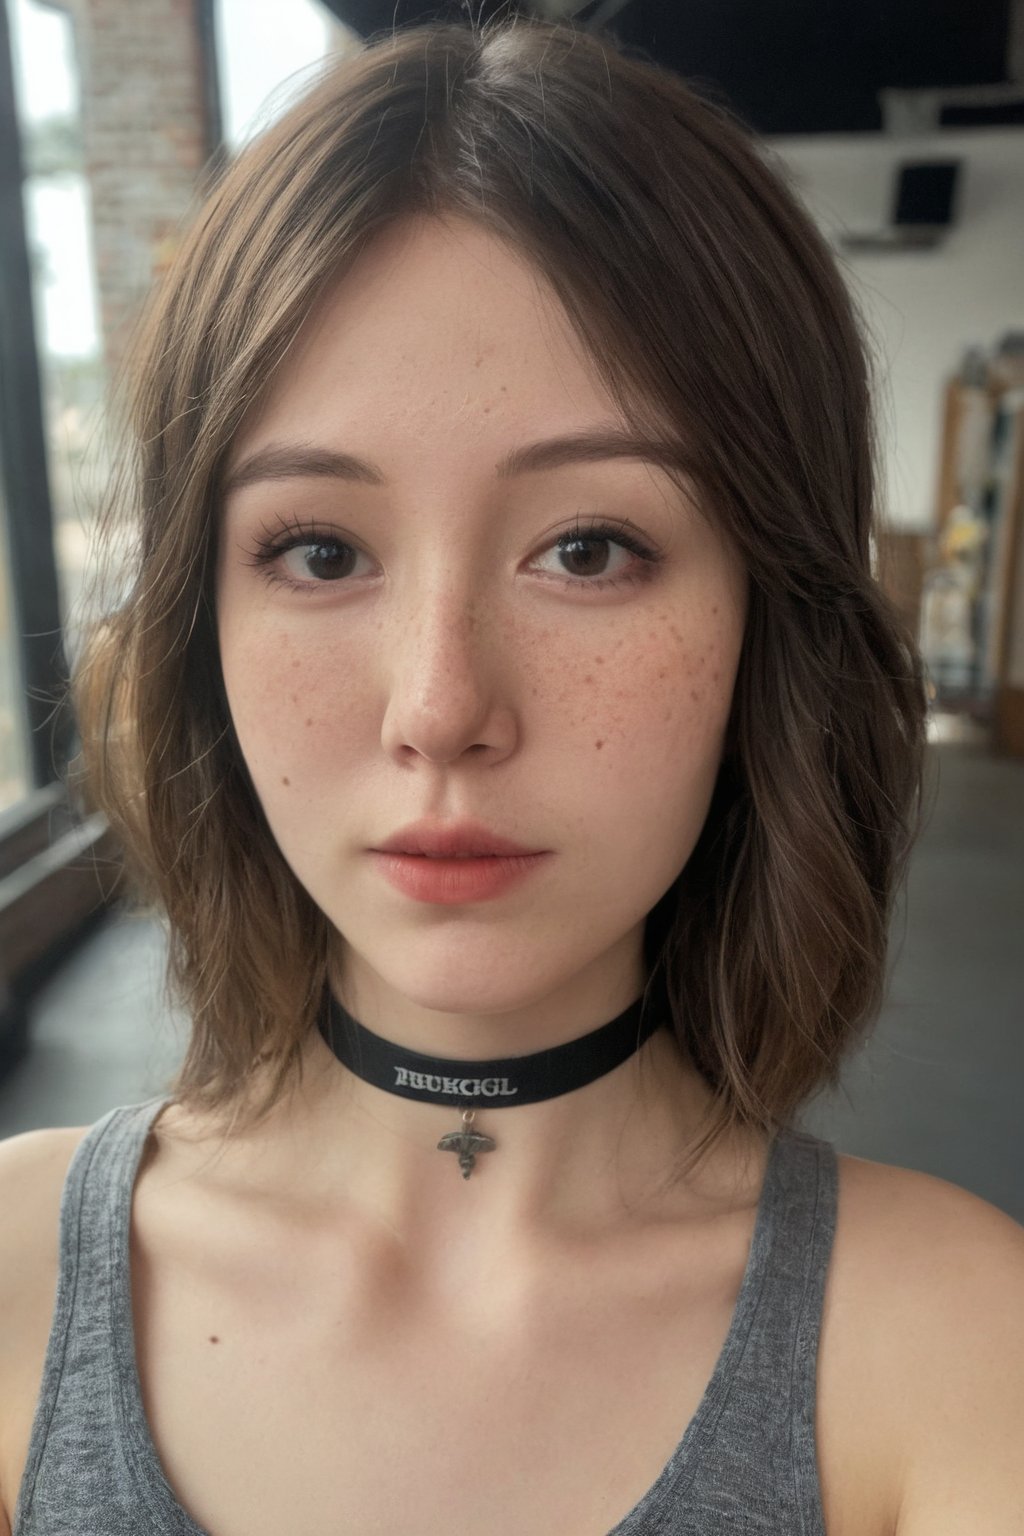 (ultra realistic,best quality),photorealistic,Extremely Realistic, in depth, cinematic light,hubggirl,

medium hair, detailed face, detailed nose, woman wearing tank top, freckles, choker, smirk, tattoo, 

intricate background, realism,realistic,raw,analog,portrait,photorealistic,